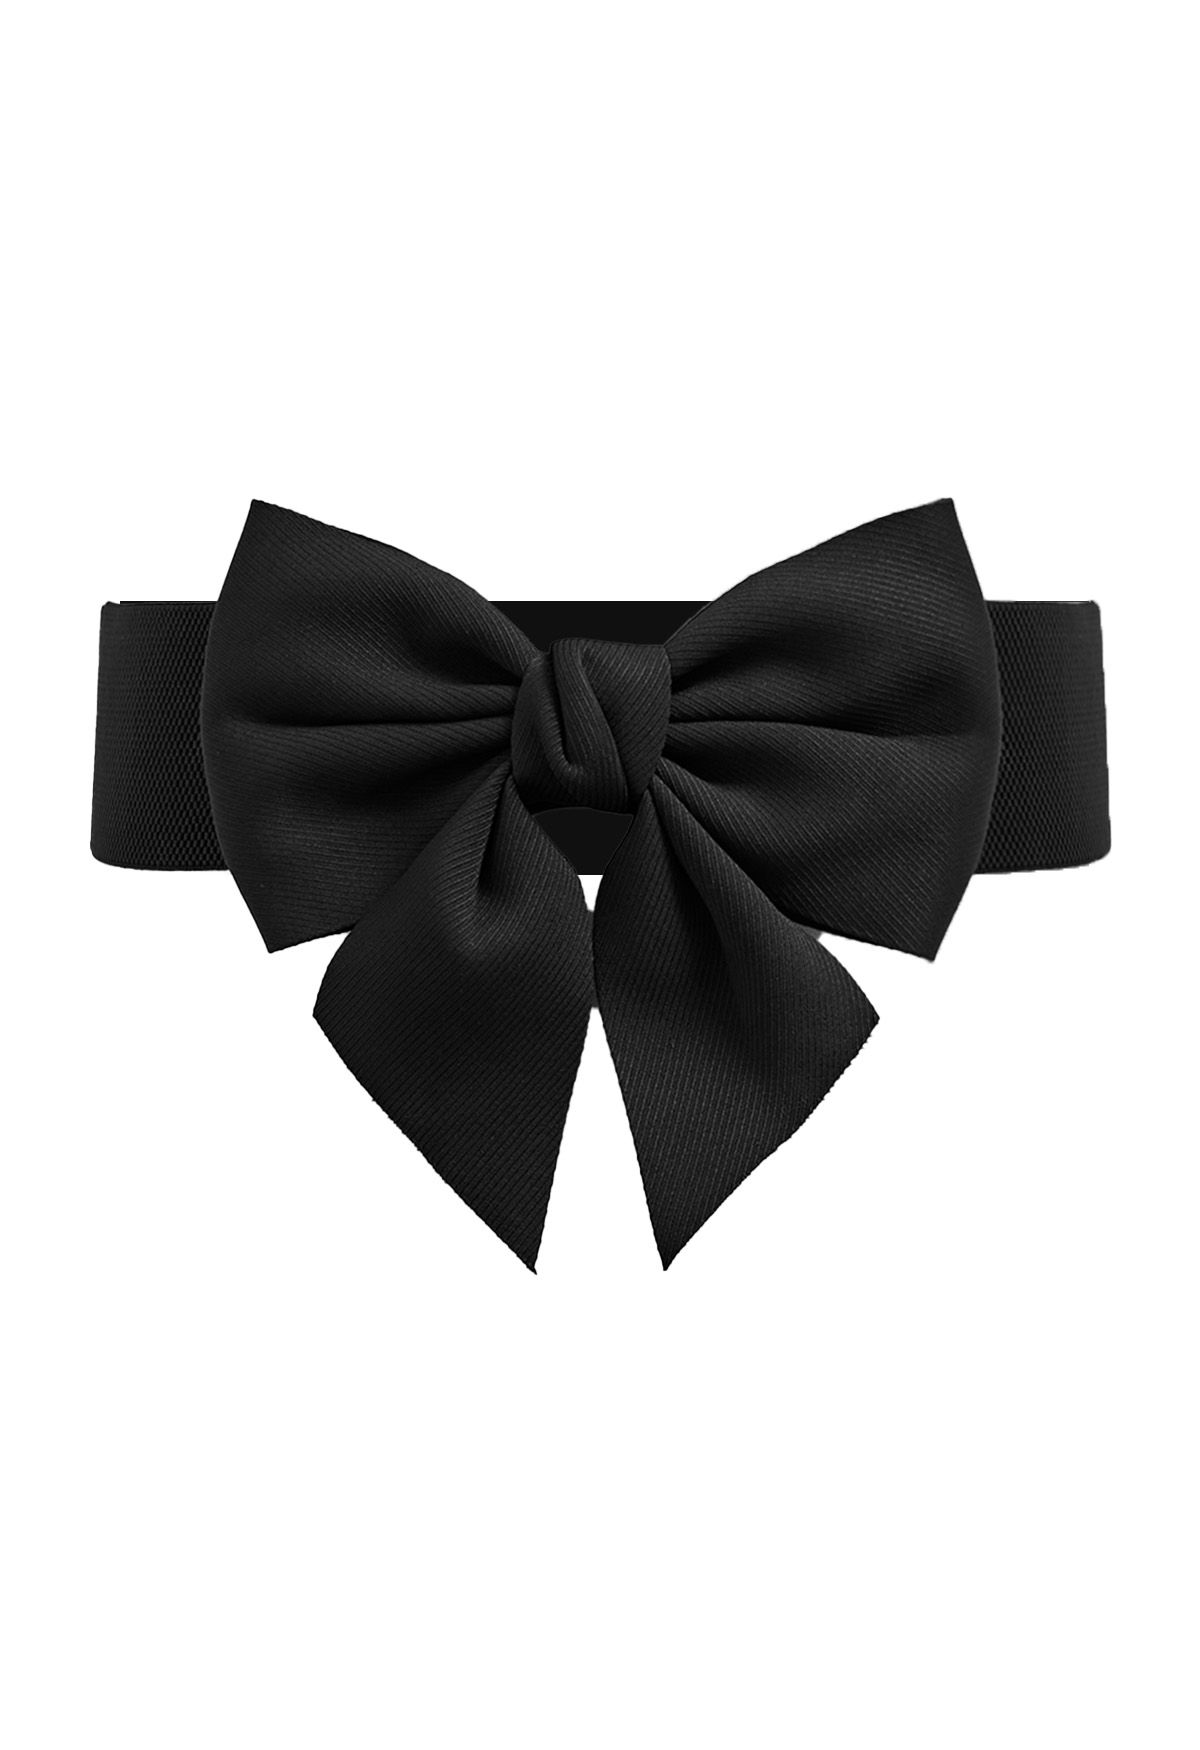 Stretchy Solid Color Bowknot Corset Belt in Black - Retro, Indie and ...